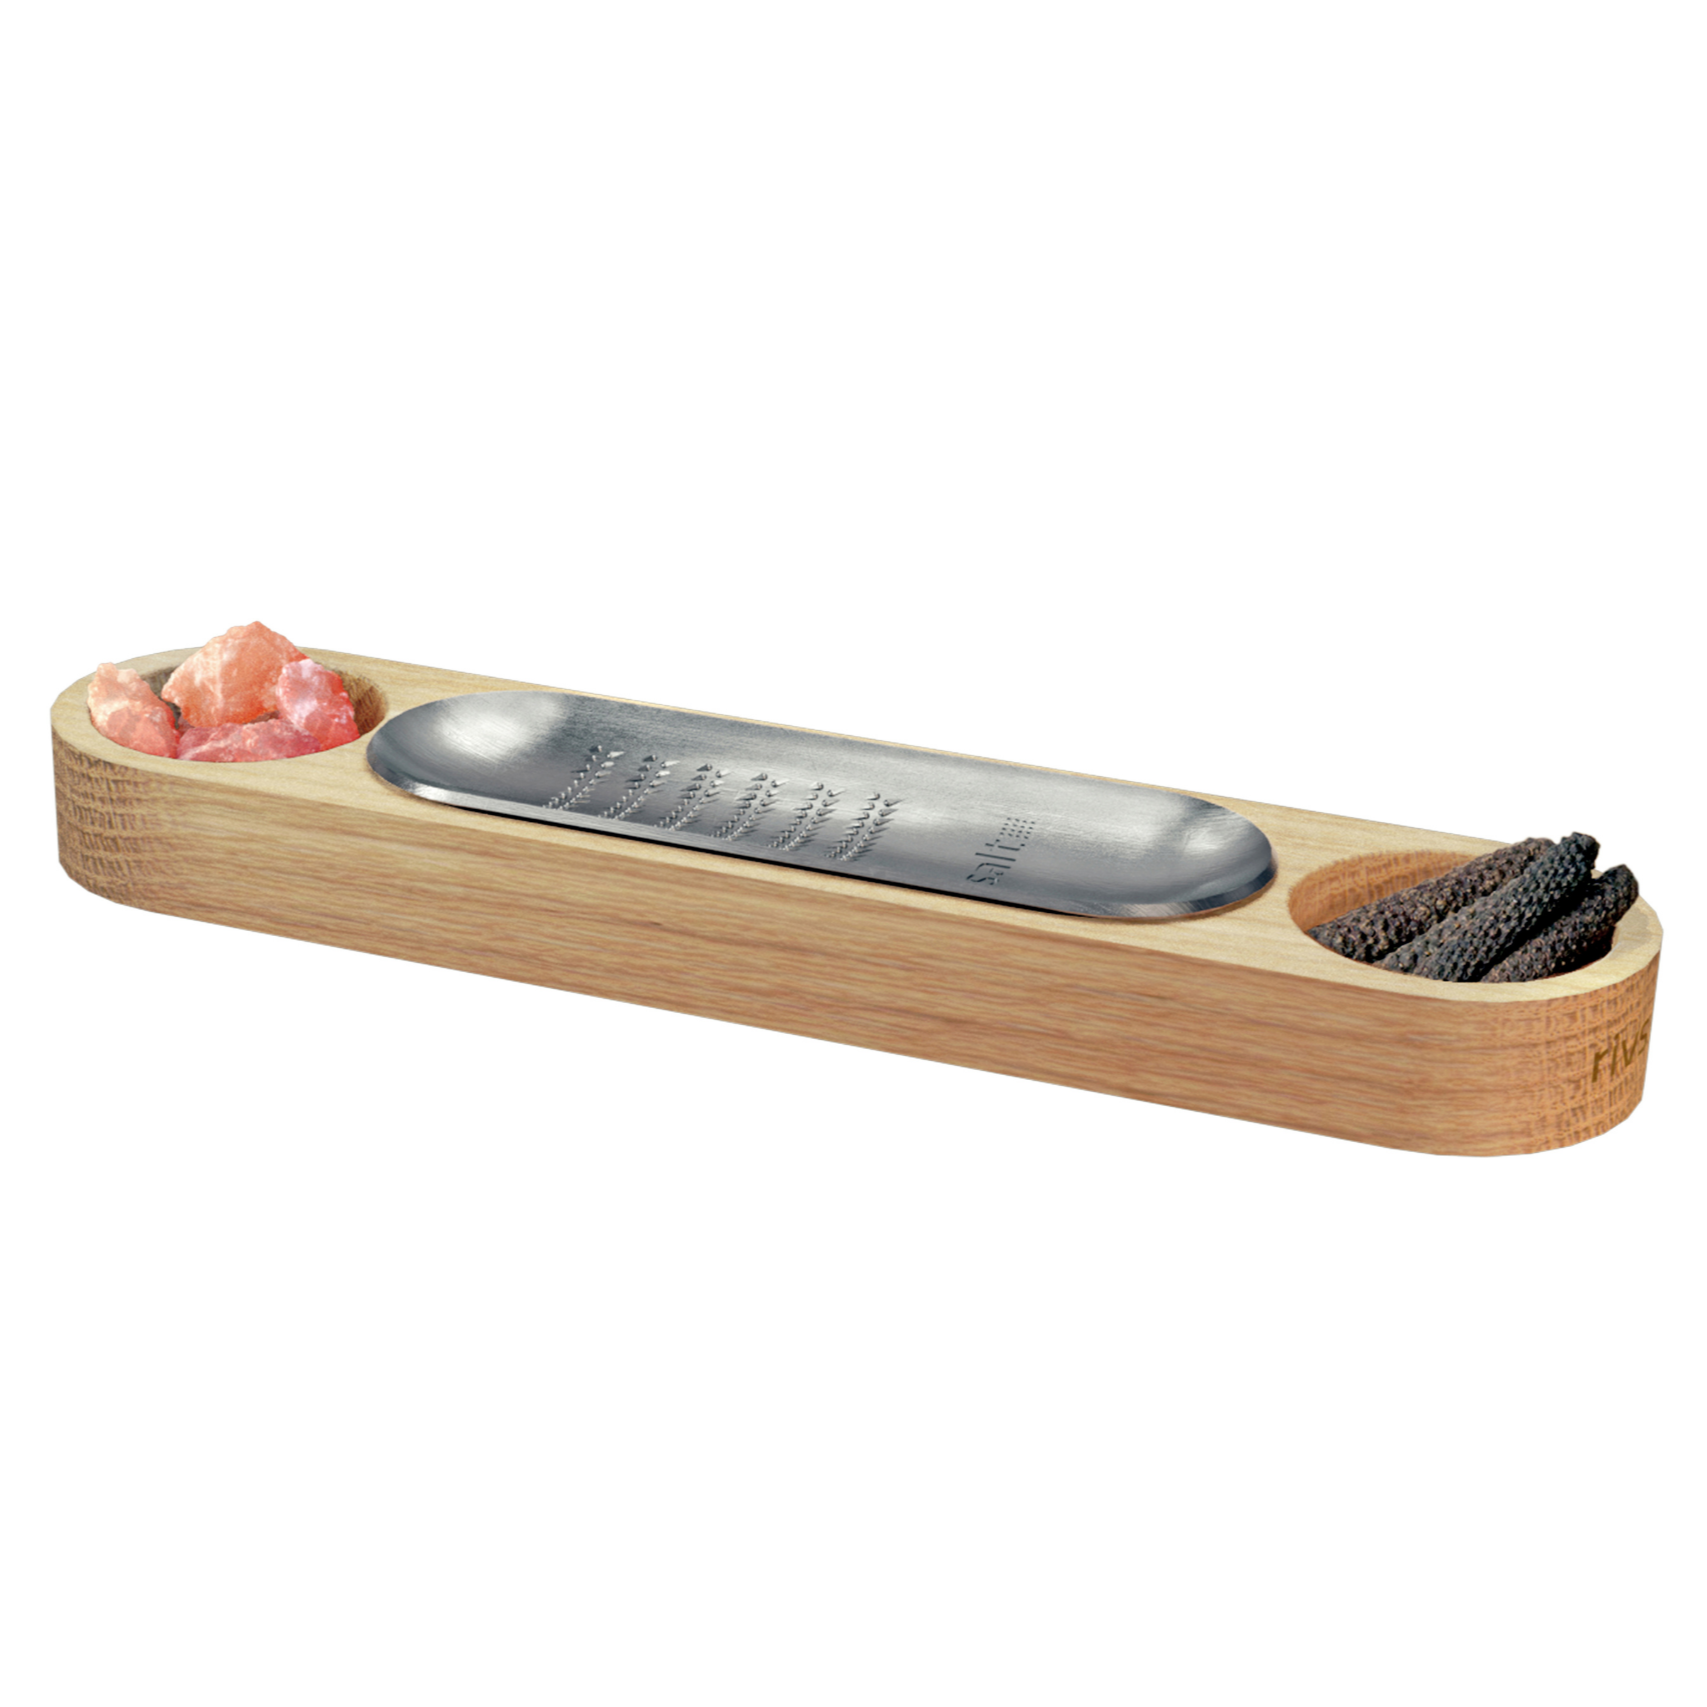 034 SALT & PEPPER [THE DINING TABLE ESSENTIALS] - stainless steel grater. natural wood stand. himalayan salt rocks. java long peppers. sleek gift box.